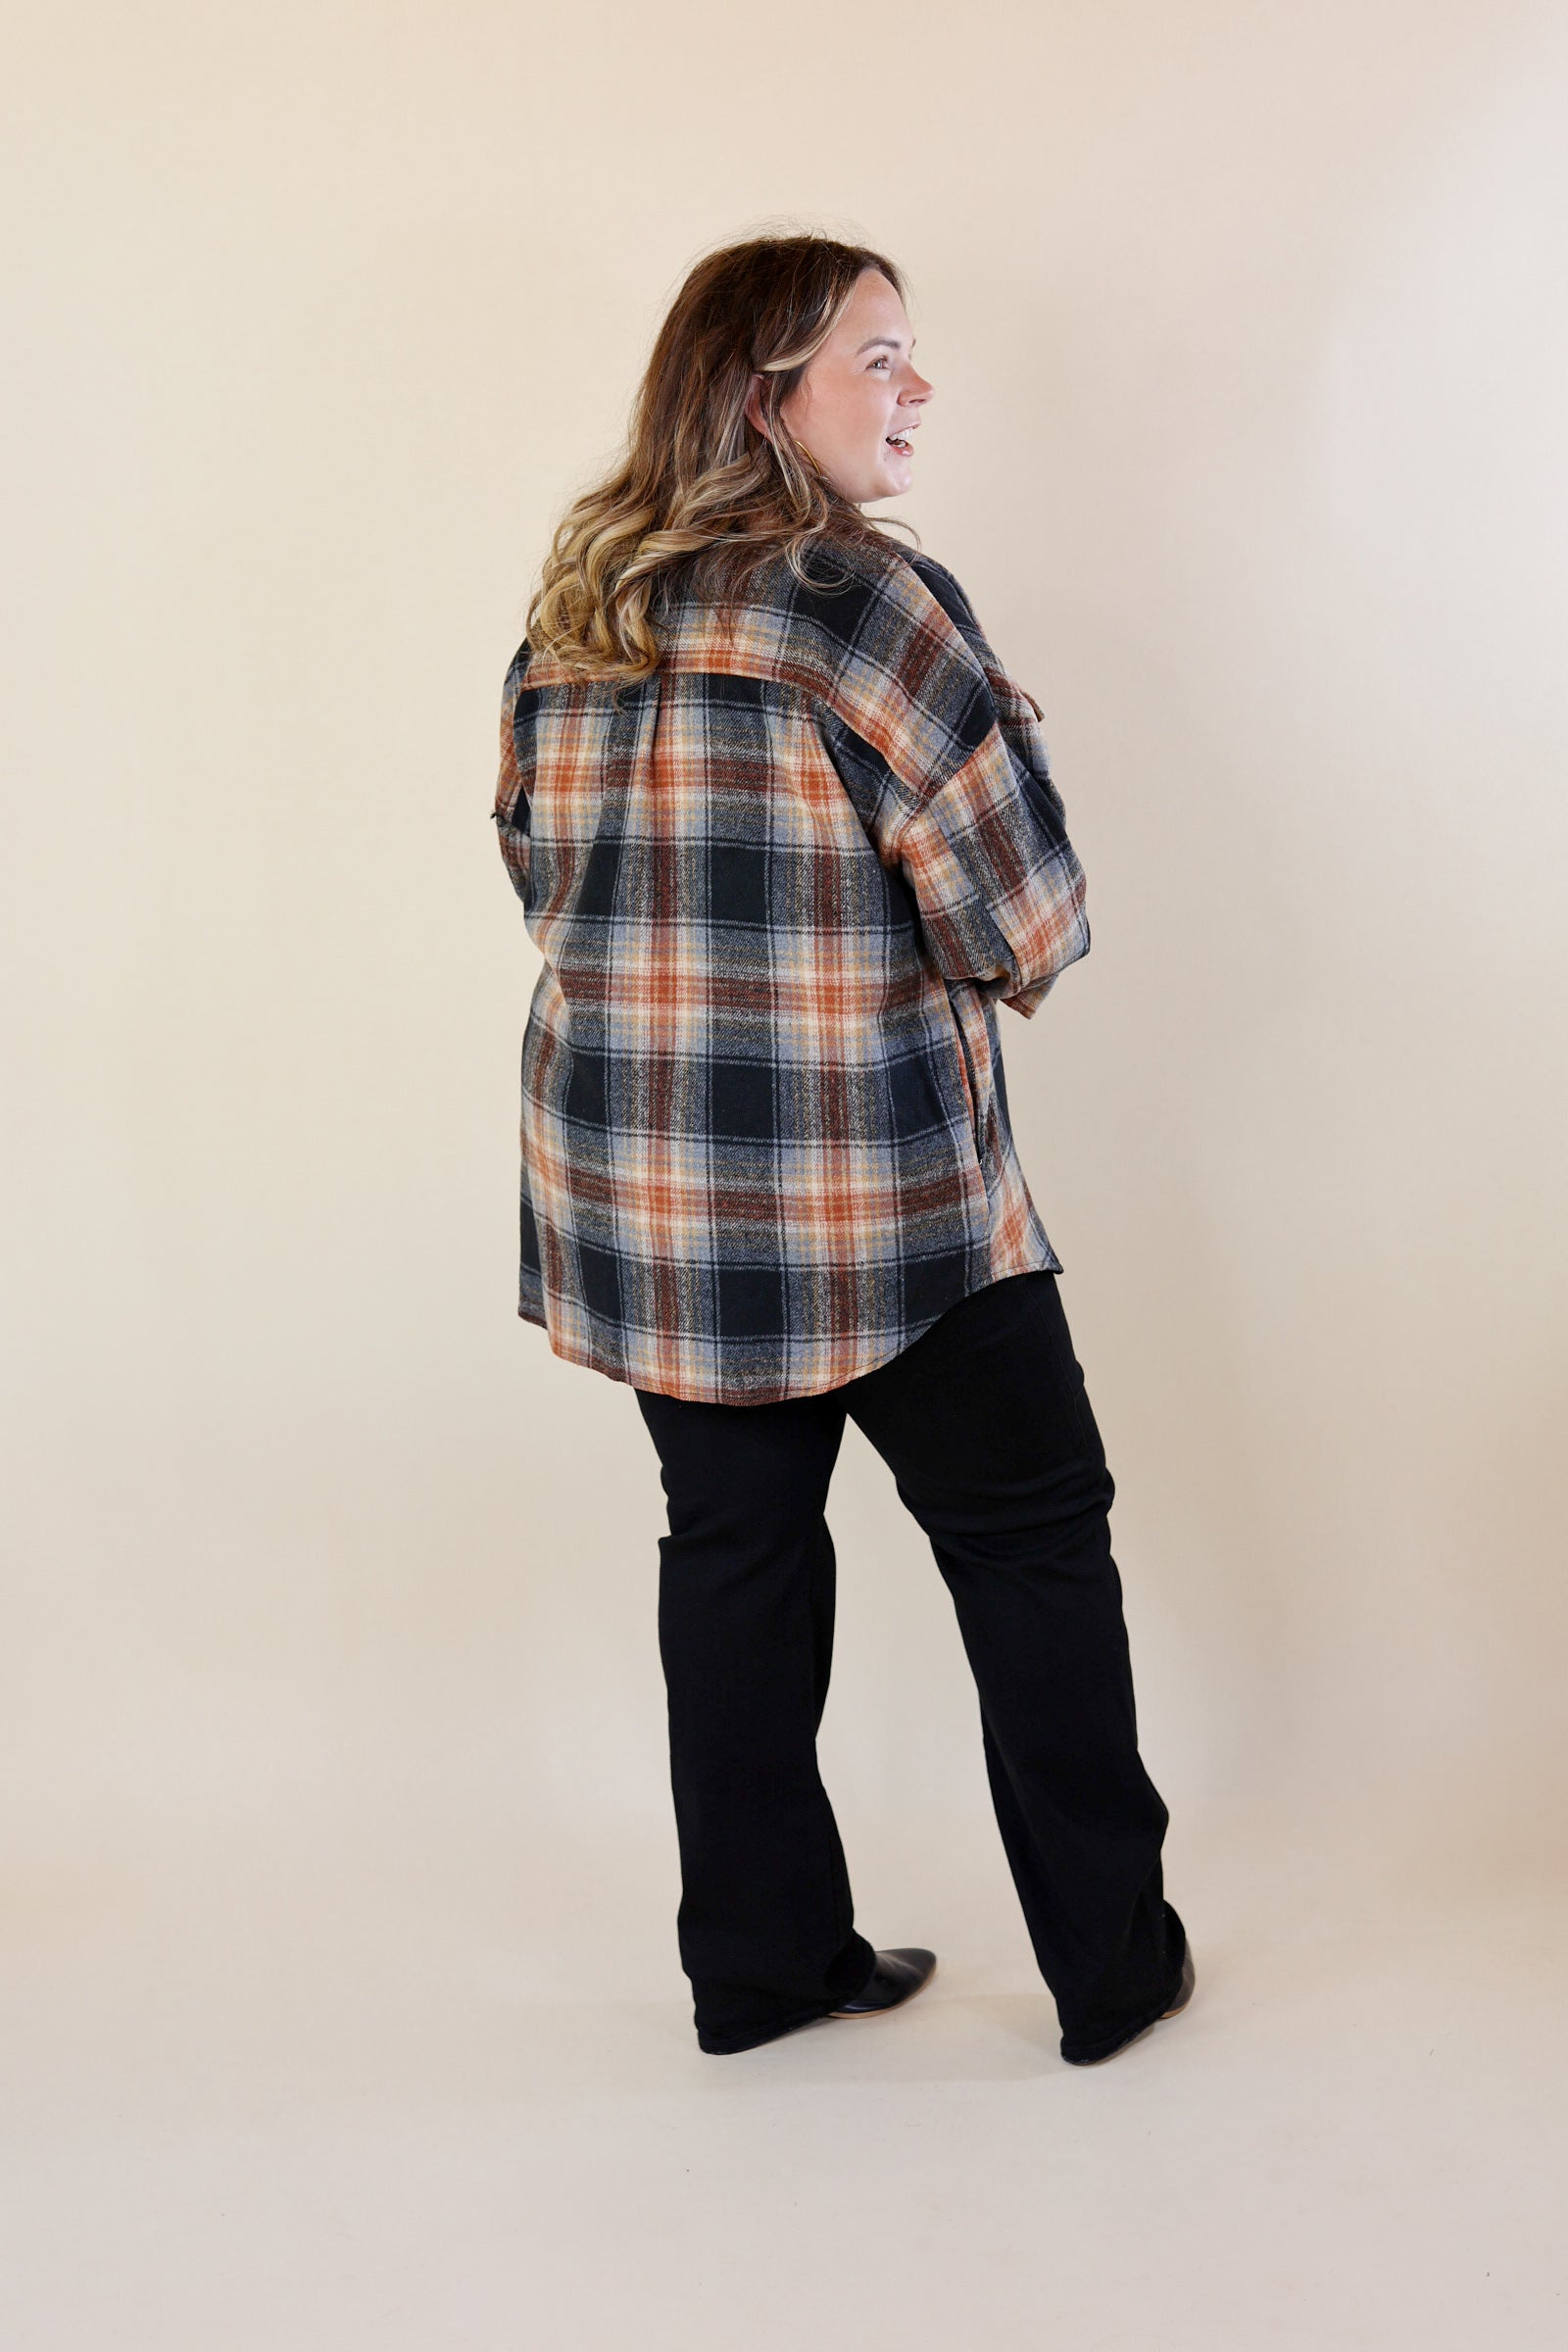 Kindness Everywhere Button Up Plaid Shacket in Black Mix - Giddy Up Glamour Boutique